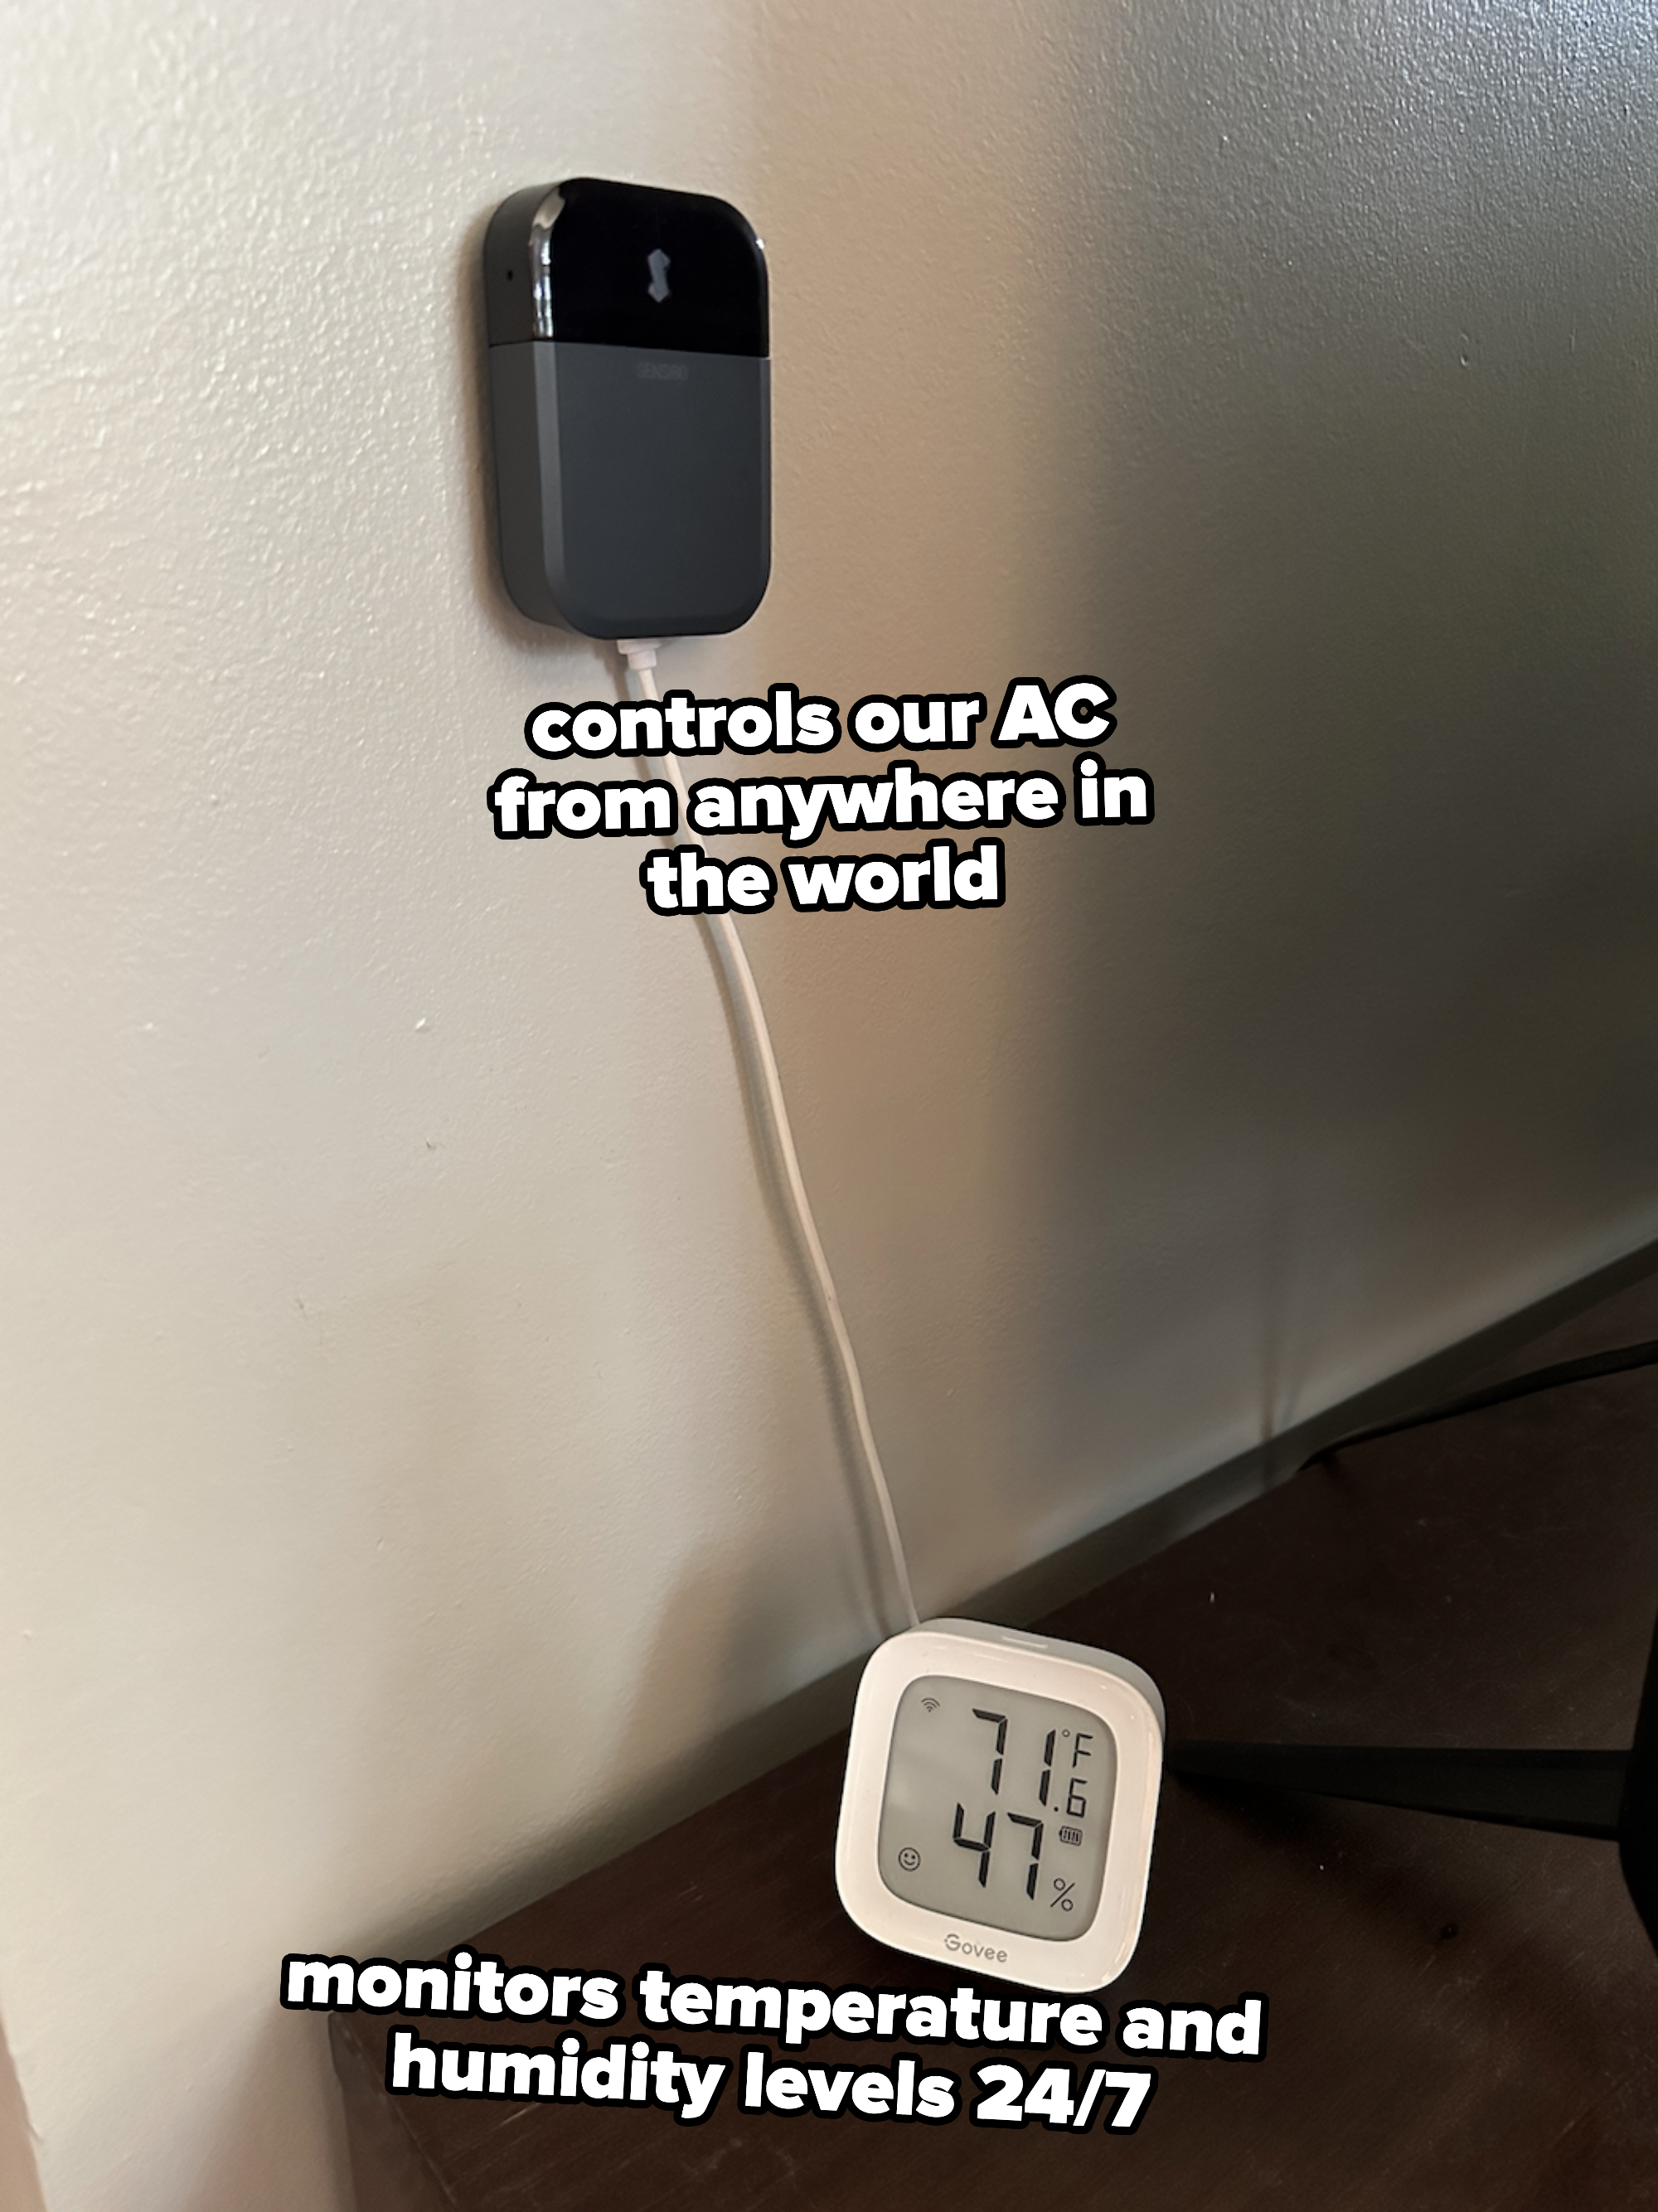 wall mounted device that controls AC from anywhere in the world and a small display showing temperature and the humidity level of the room